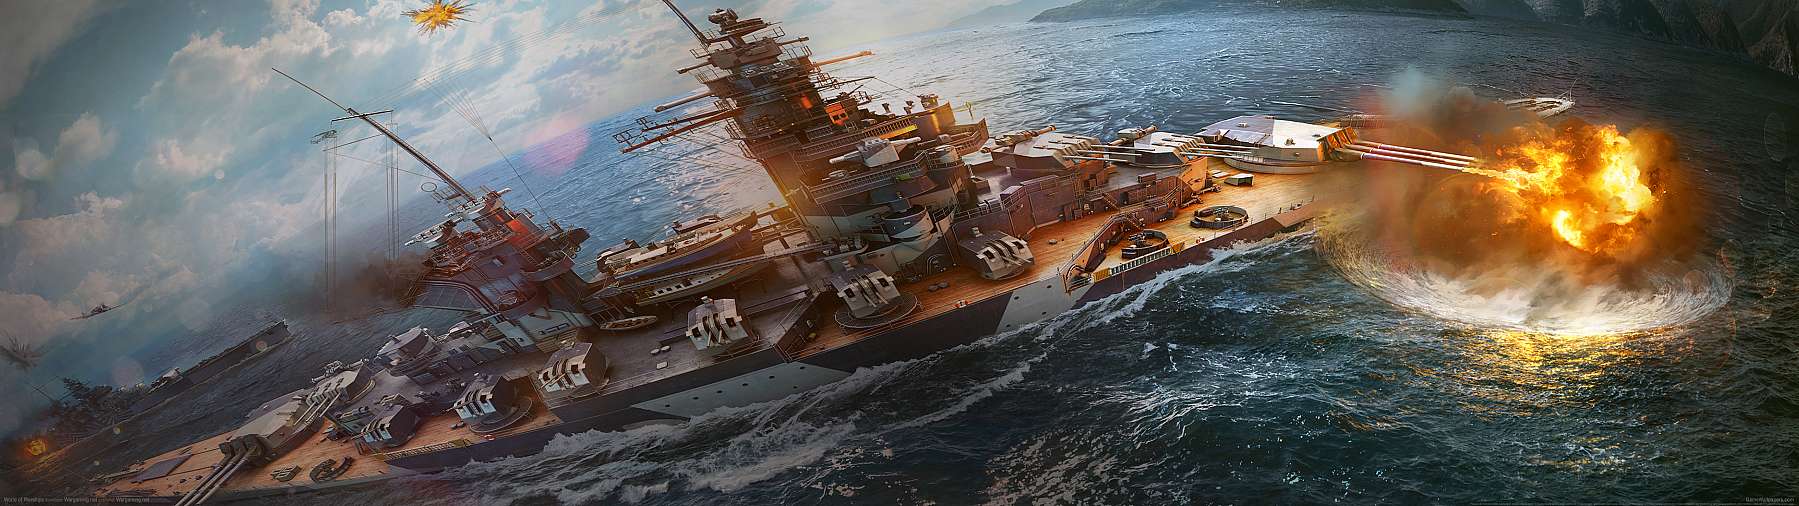 World of Warships superwide achtergrond 27